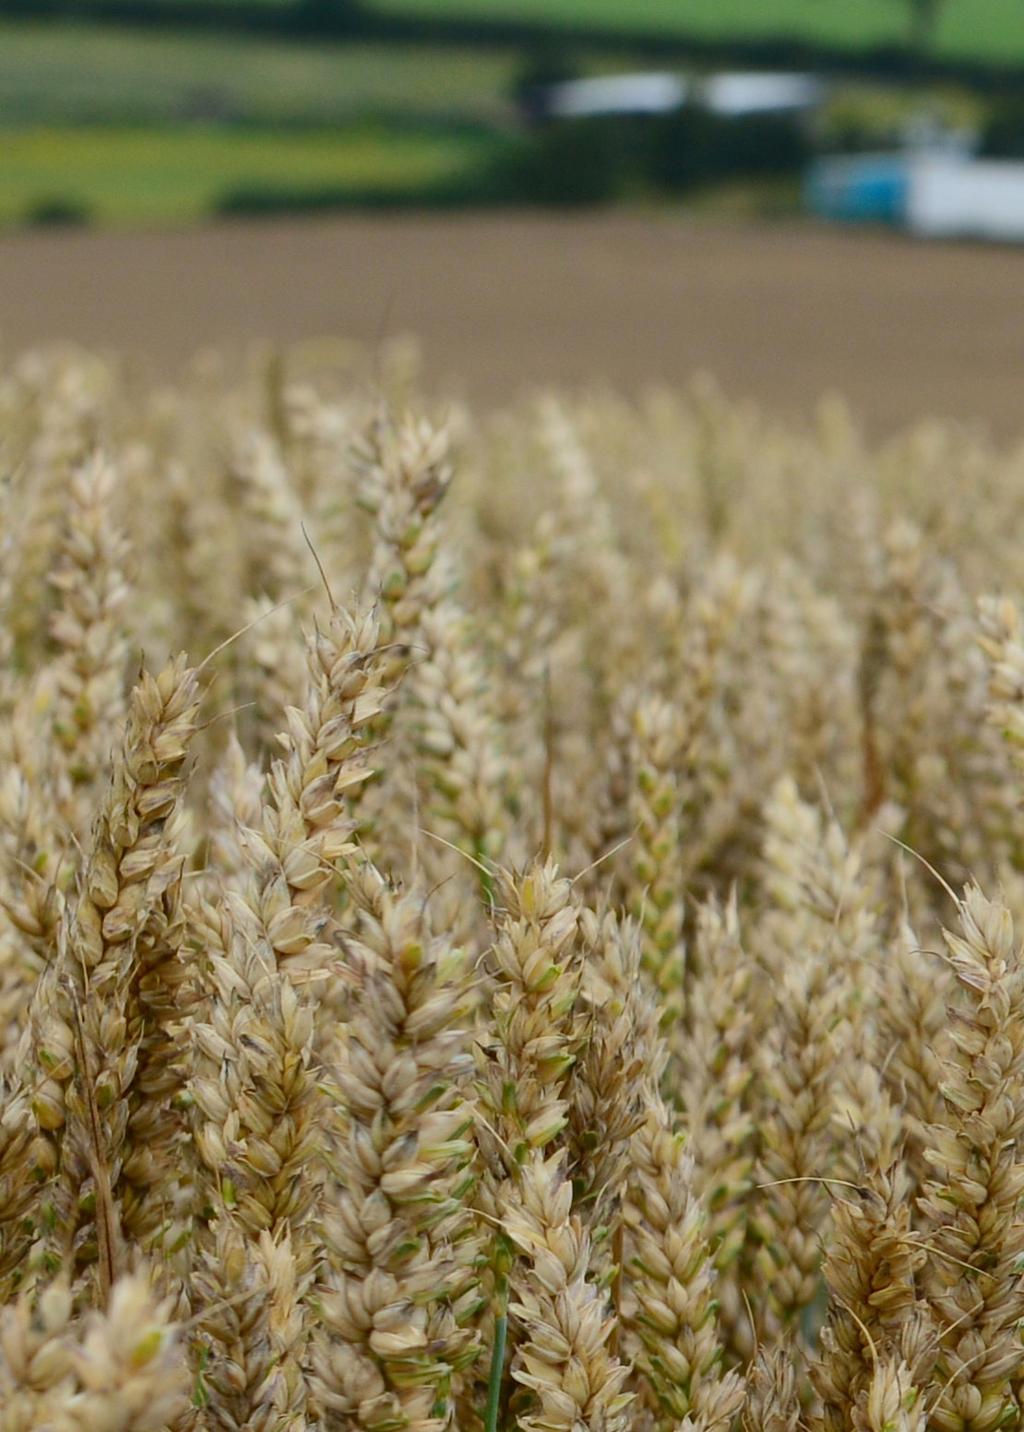 BEYOND THE NUTRIENT VALUE Global trial results showed that small grains such as wheat and barley had greater yields when was applied as a K source on sulphur-deficient soils: yield was improved on